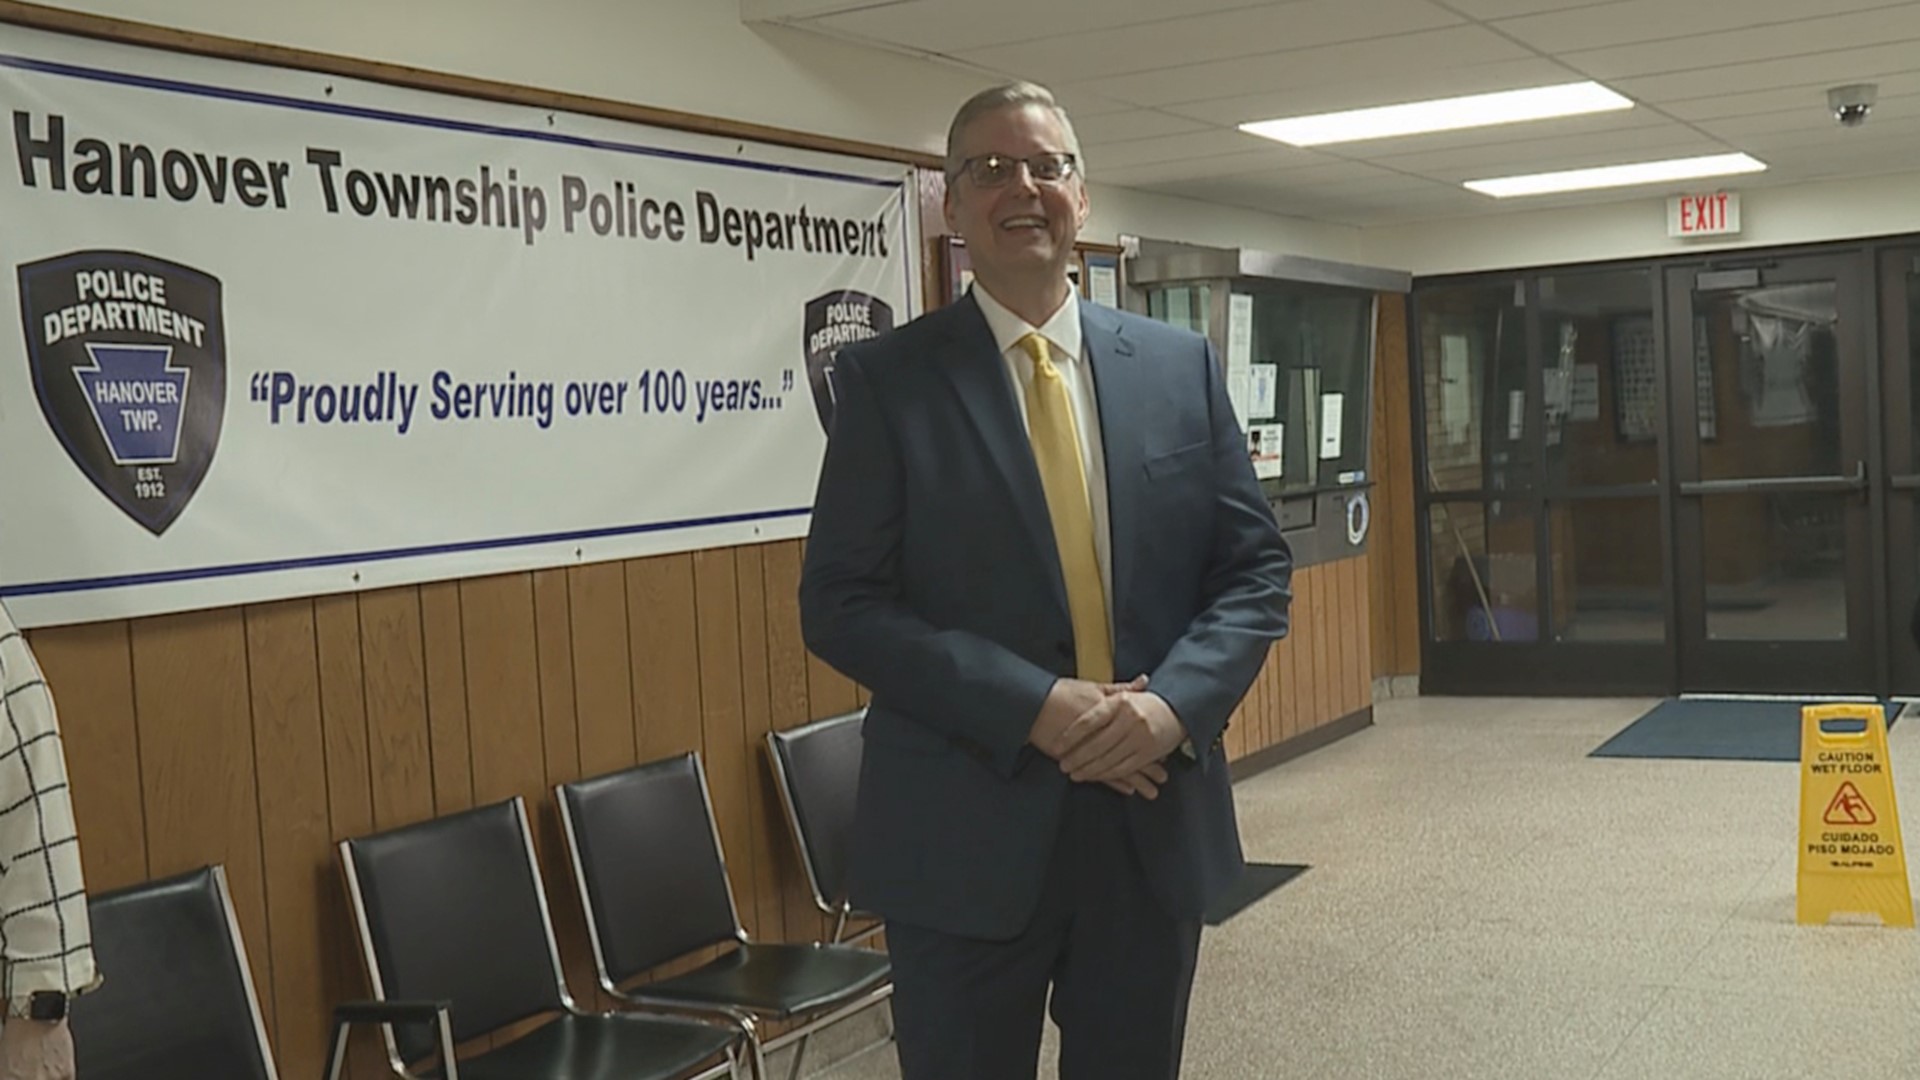 Albert Walker announced he will retire after more than 30 years on the force with the Hanover Township Police Department.